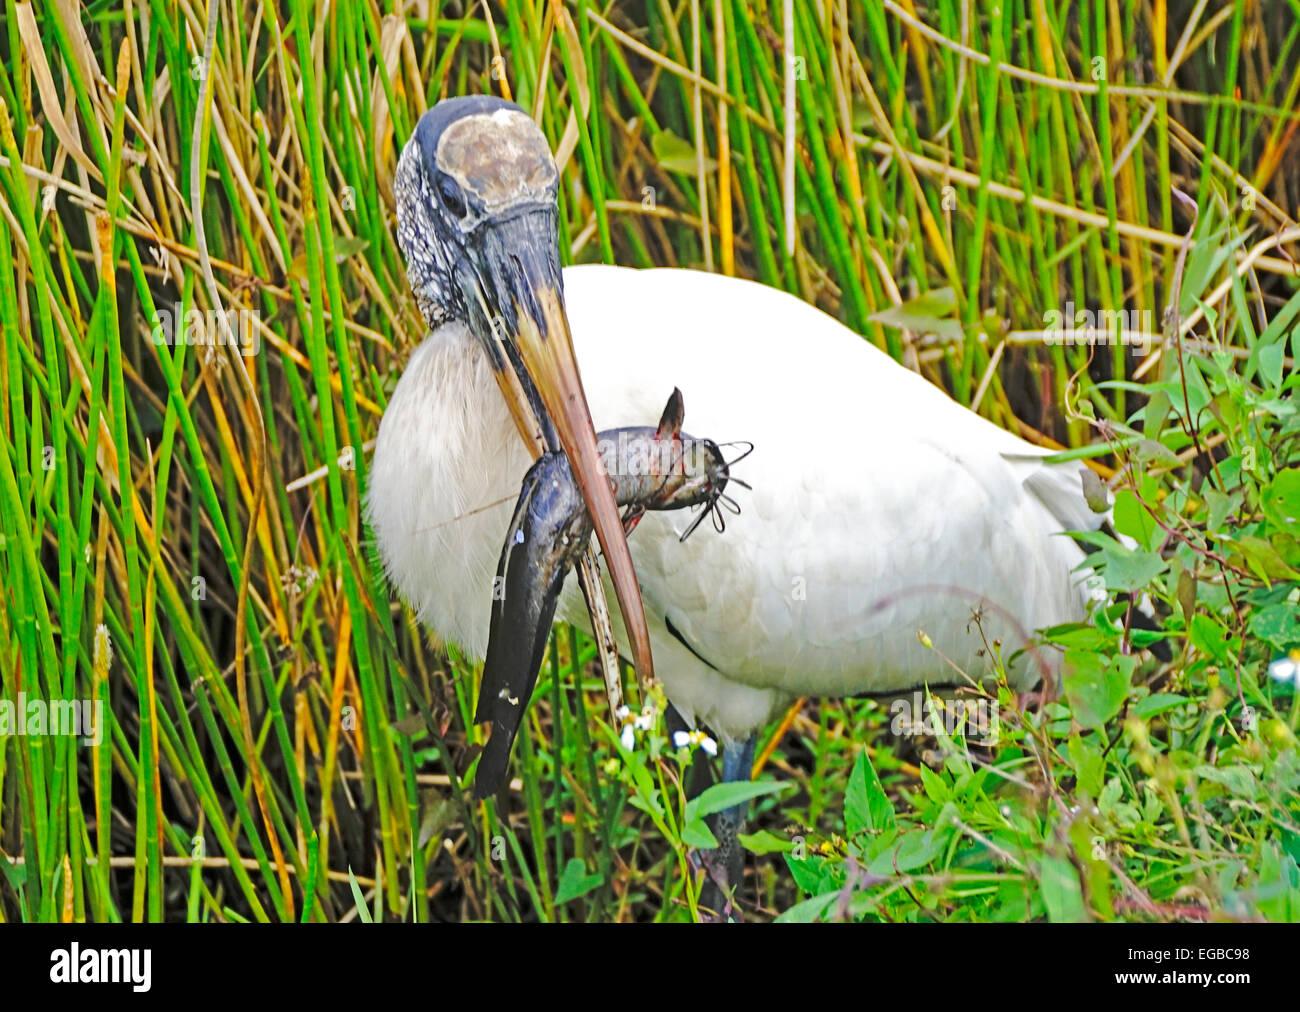 Wood Stork uses tacto-location to capture a catfish prey in Everglades National Park, Florida. Stock Photo